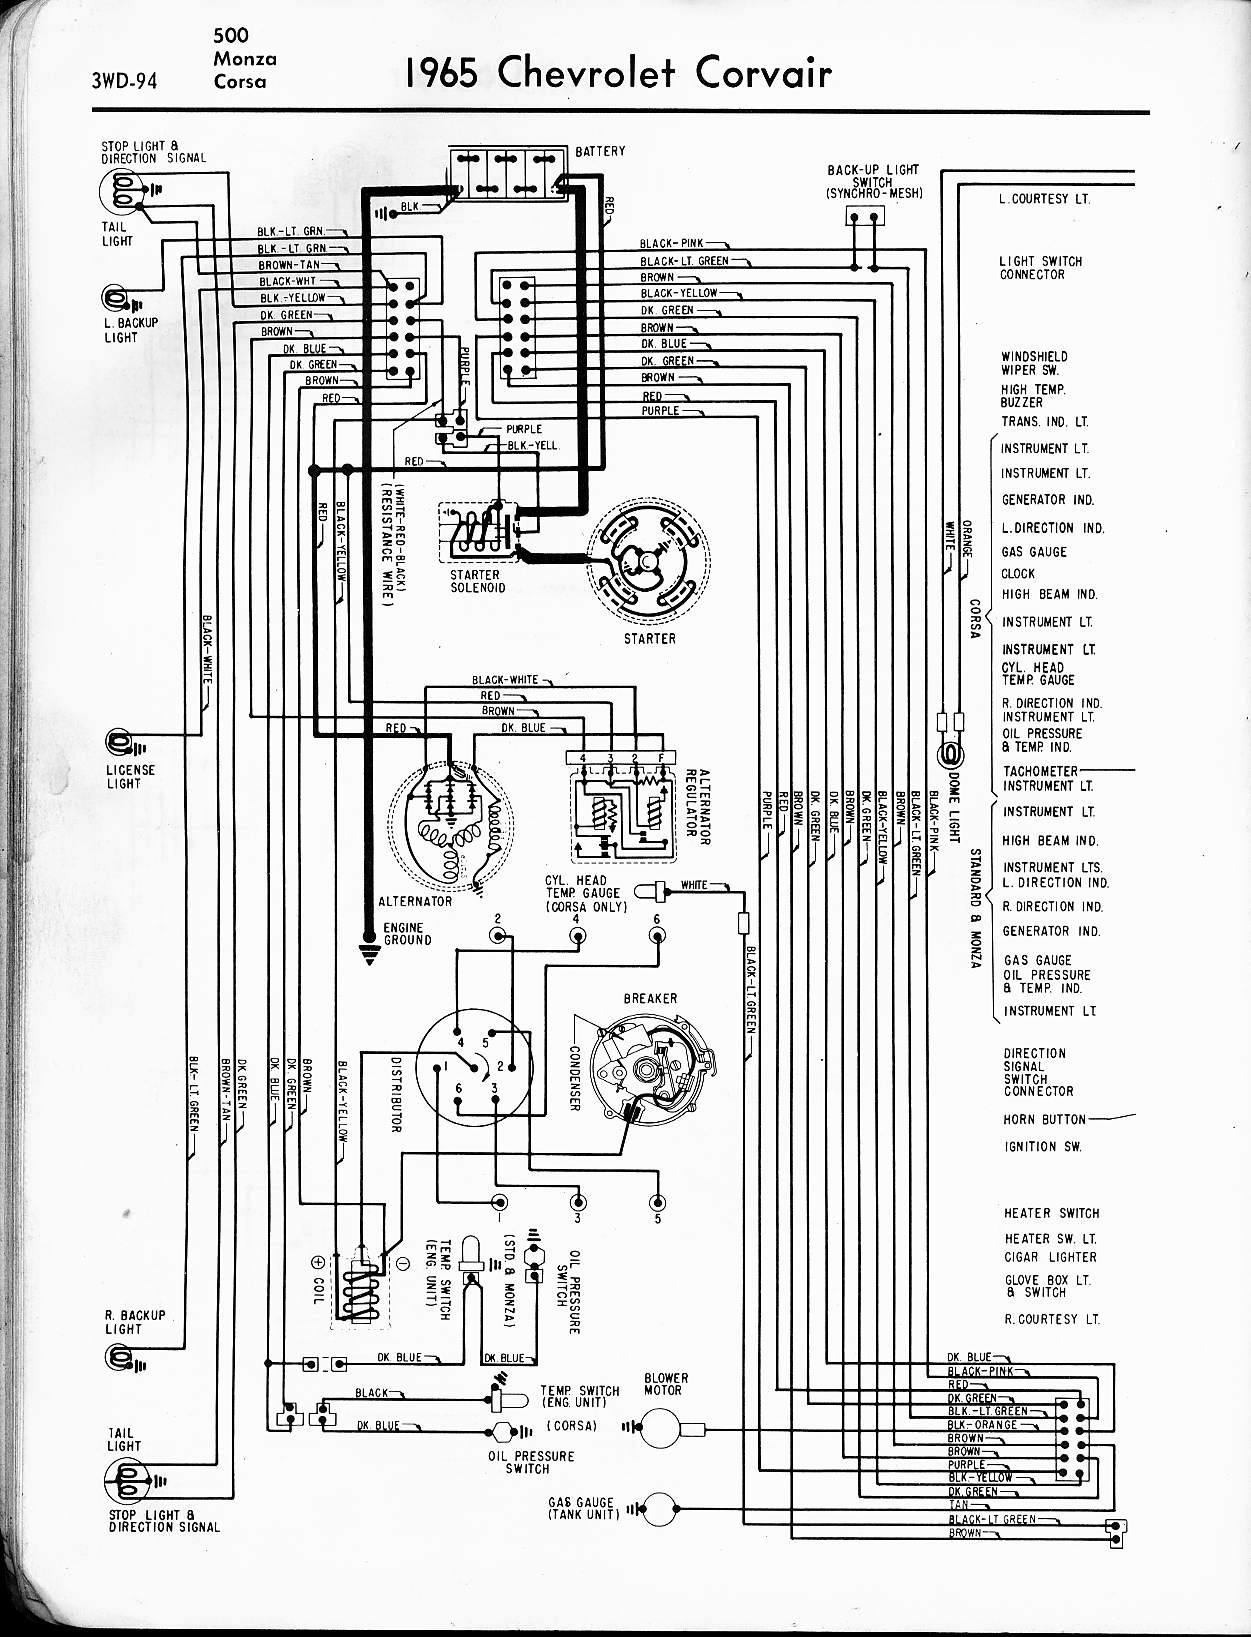 [DIAGRAM] Opel Corsa Ignition Wiring Diagrams FULL Version HD Quality